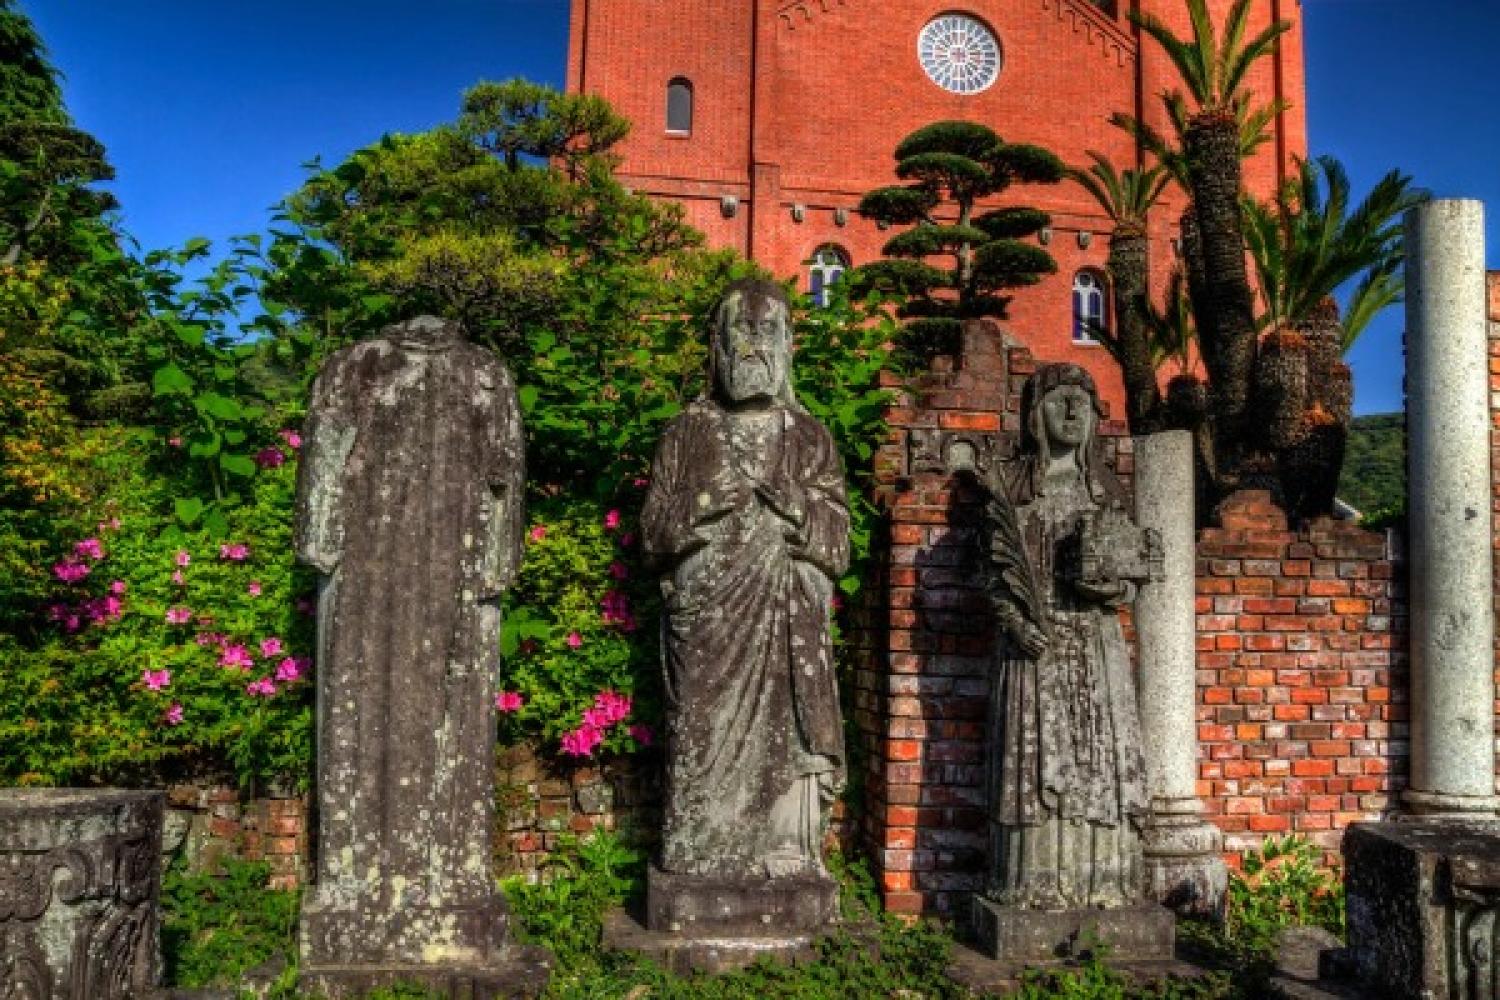 Statues and part of the brick façade from the original cathedral stand before the new church